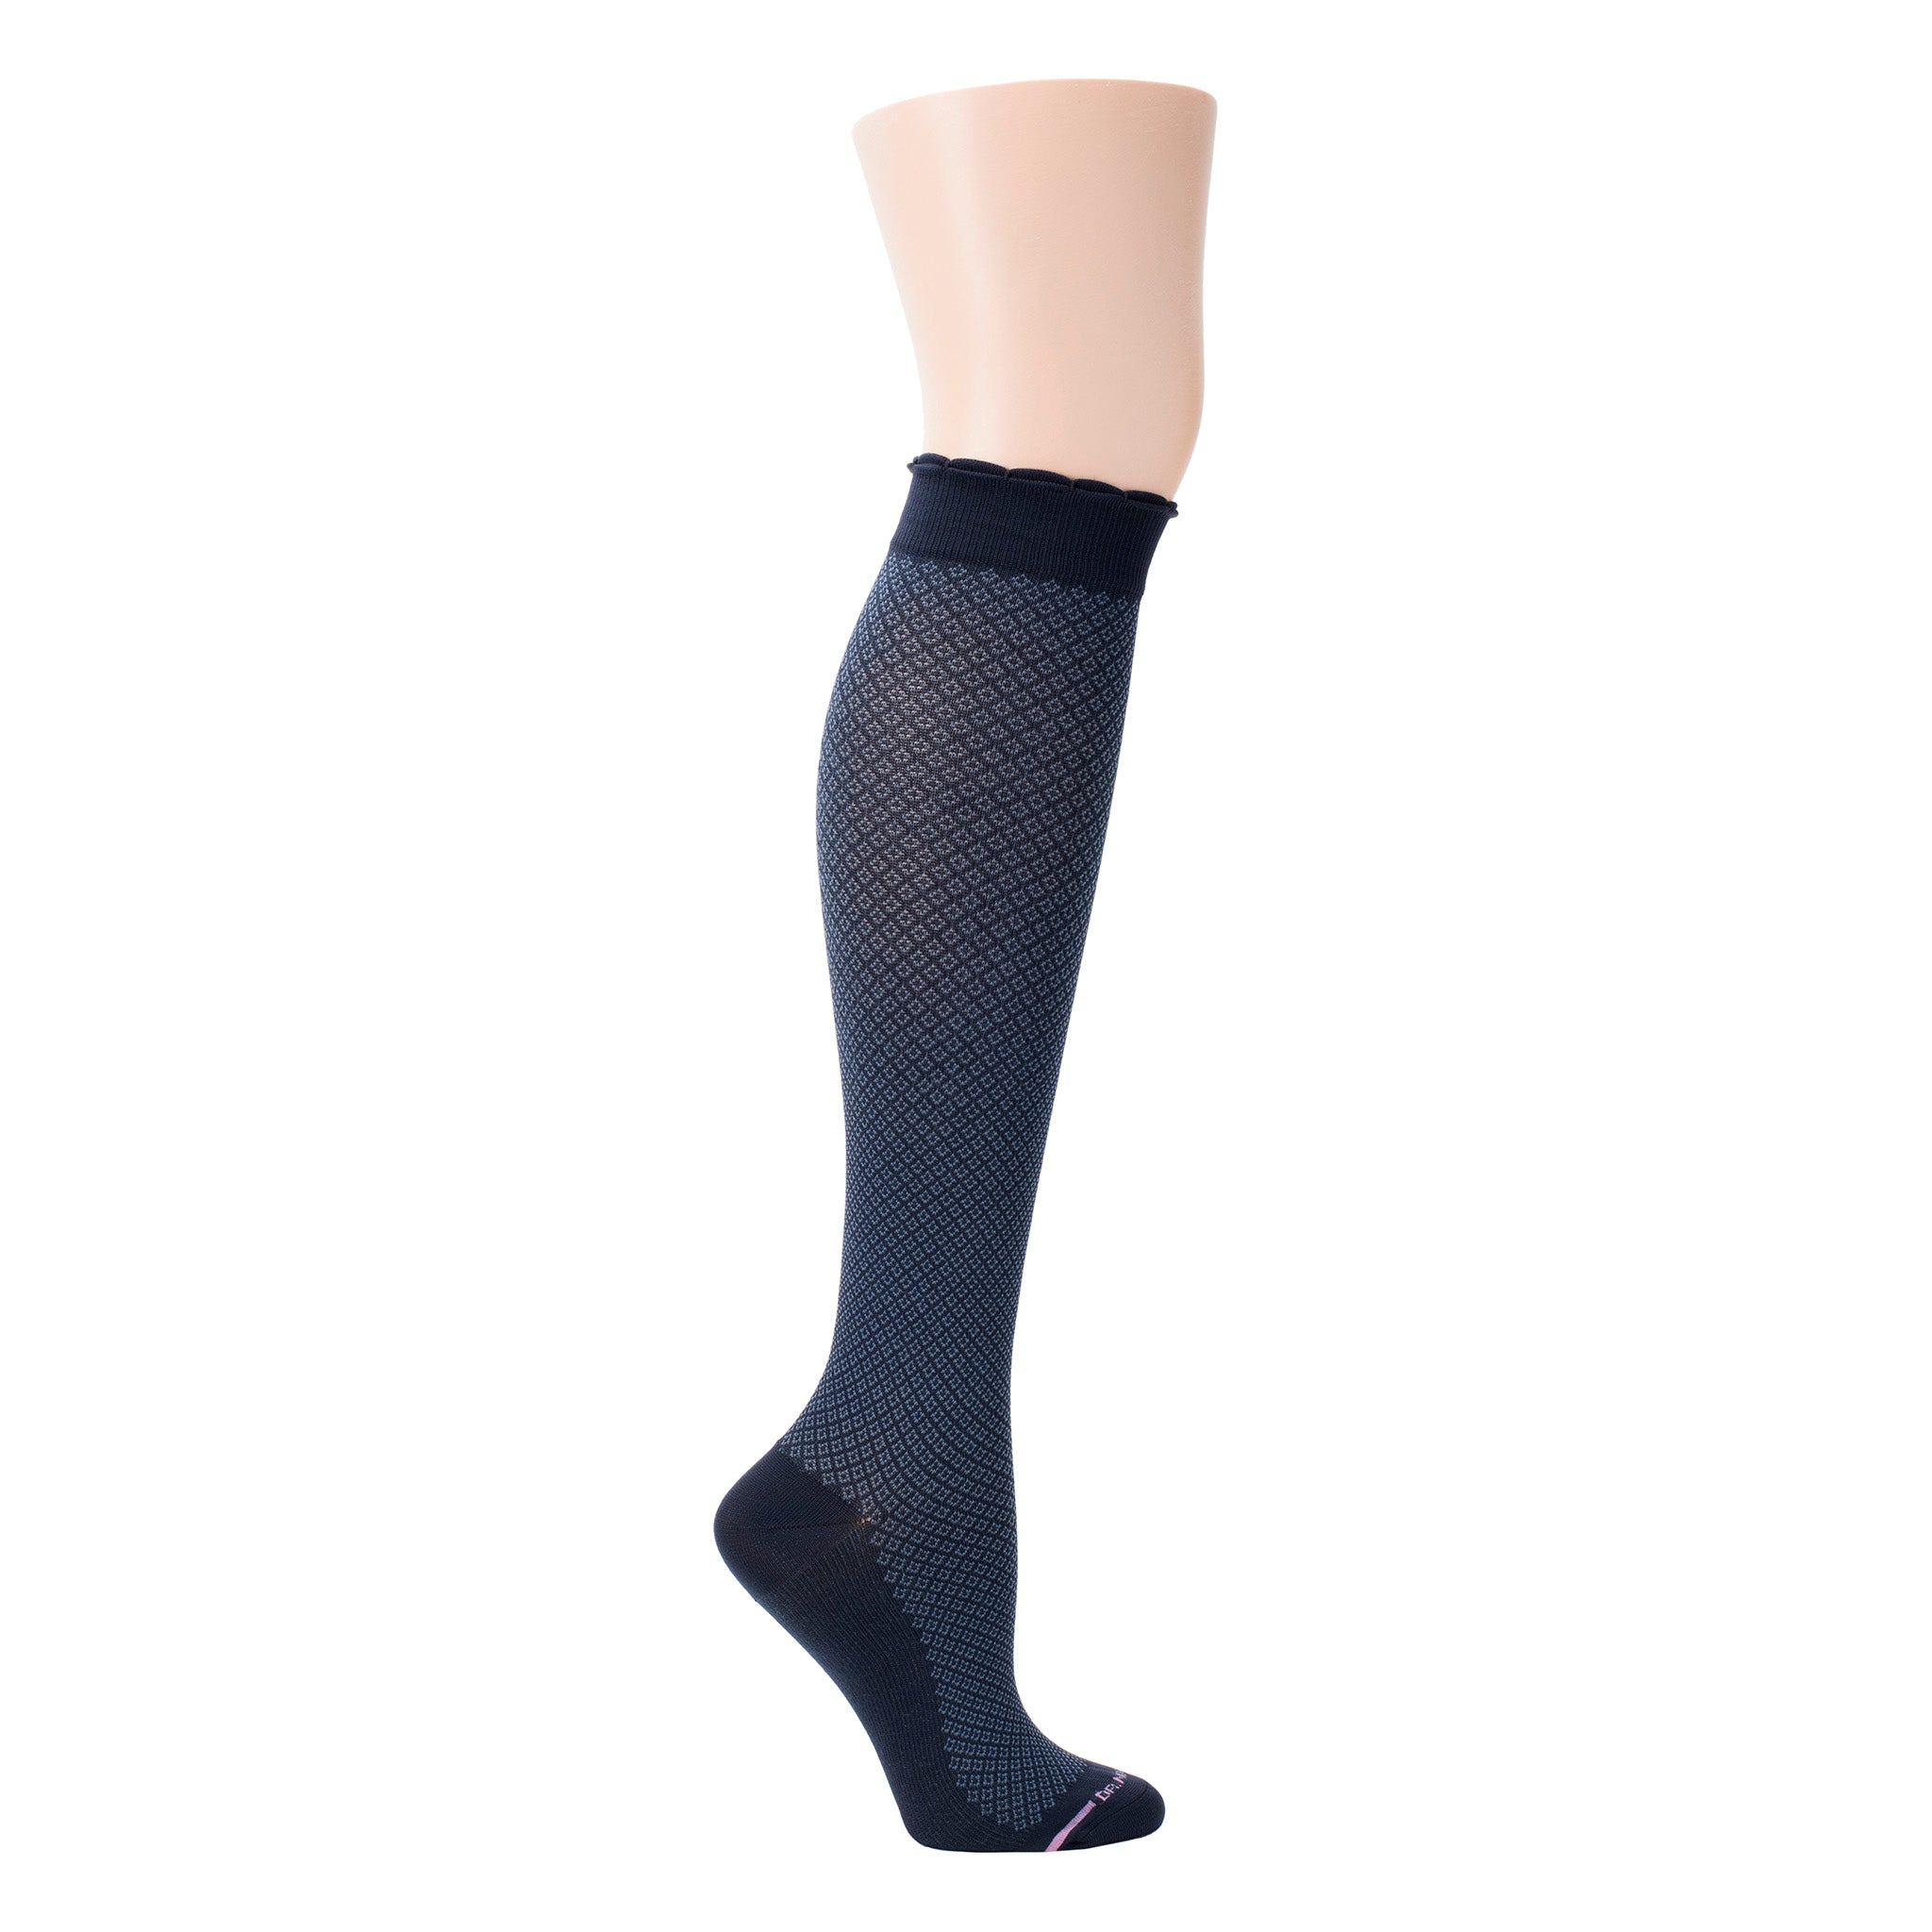 Knee-High Compression Socks For Women | Dr. Motion | Neat Plaiting